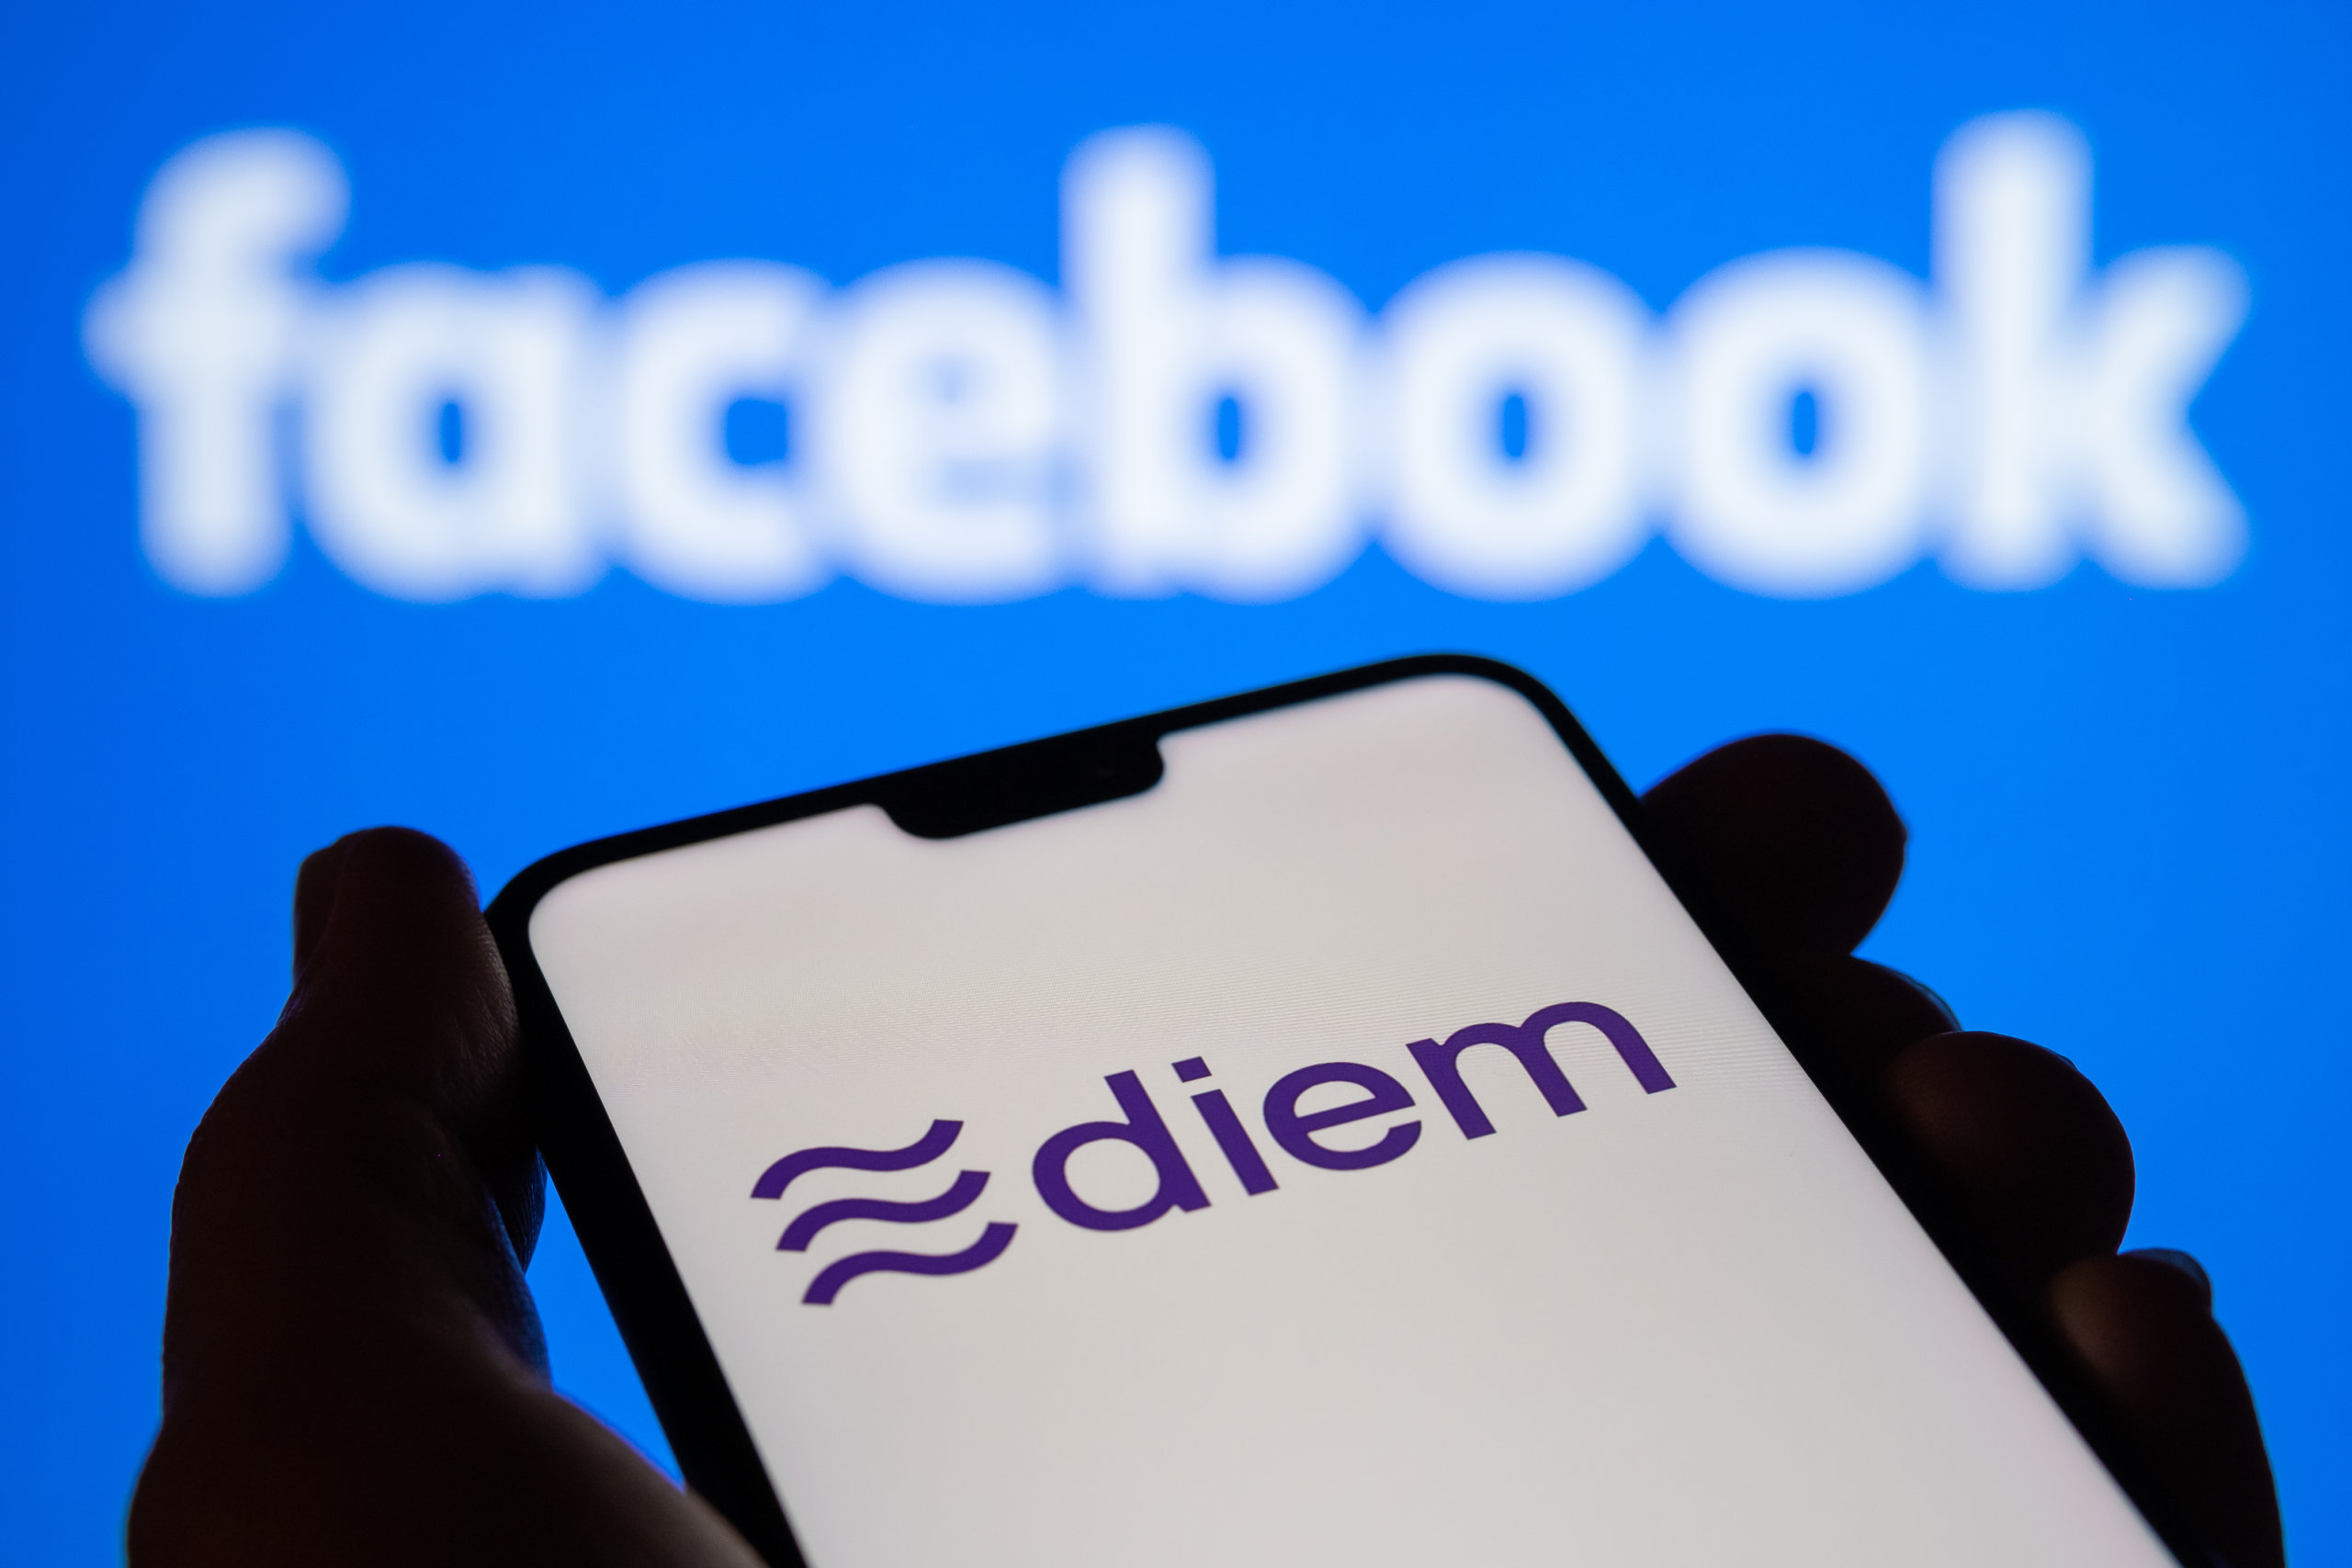 Diem says it is not under or intertwined with Facebook